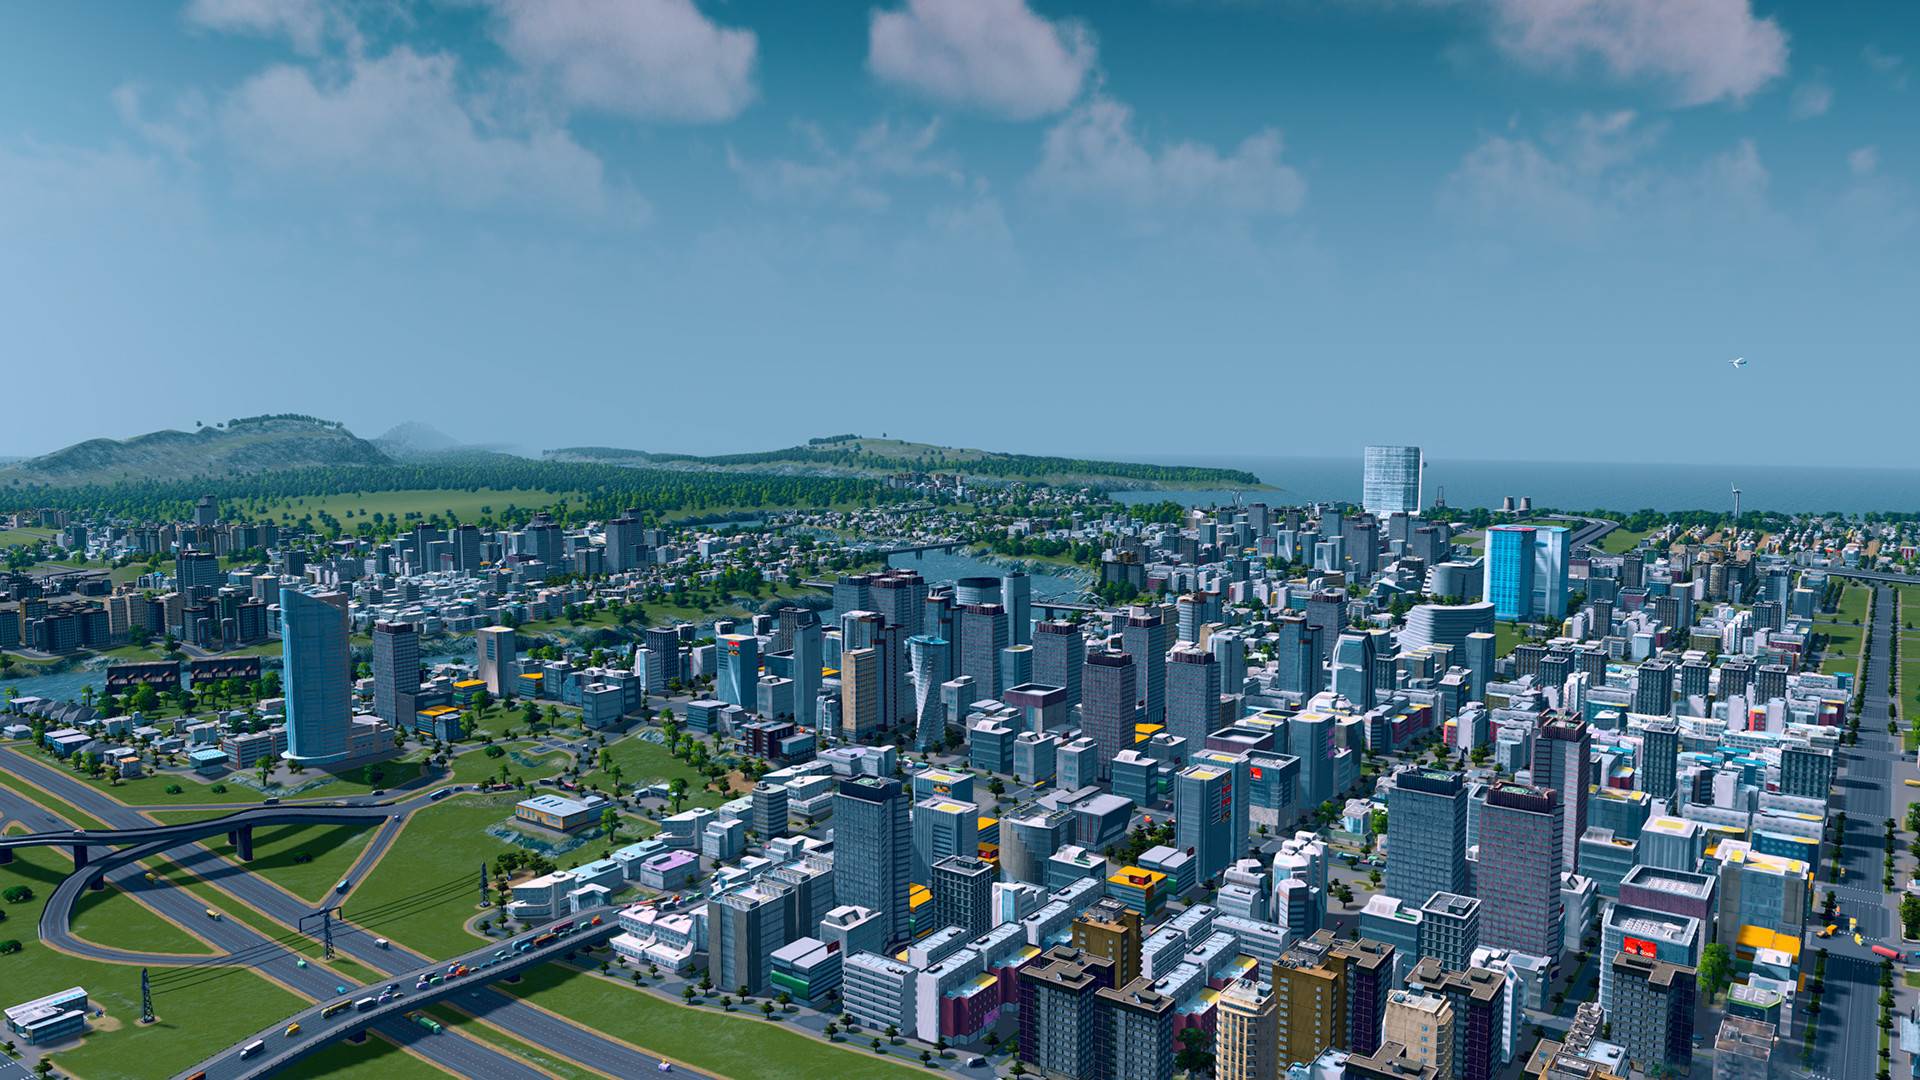 Best city-building games: Cities: Skylines. Image shows a sprawling city filled with skyscrapers.